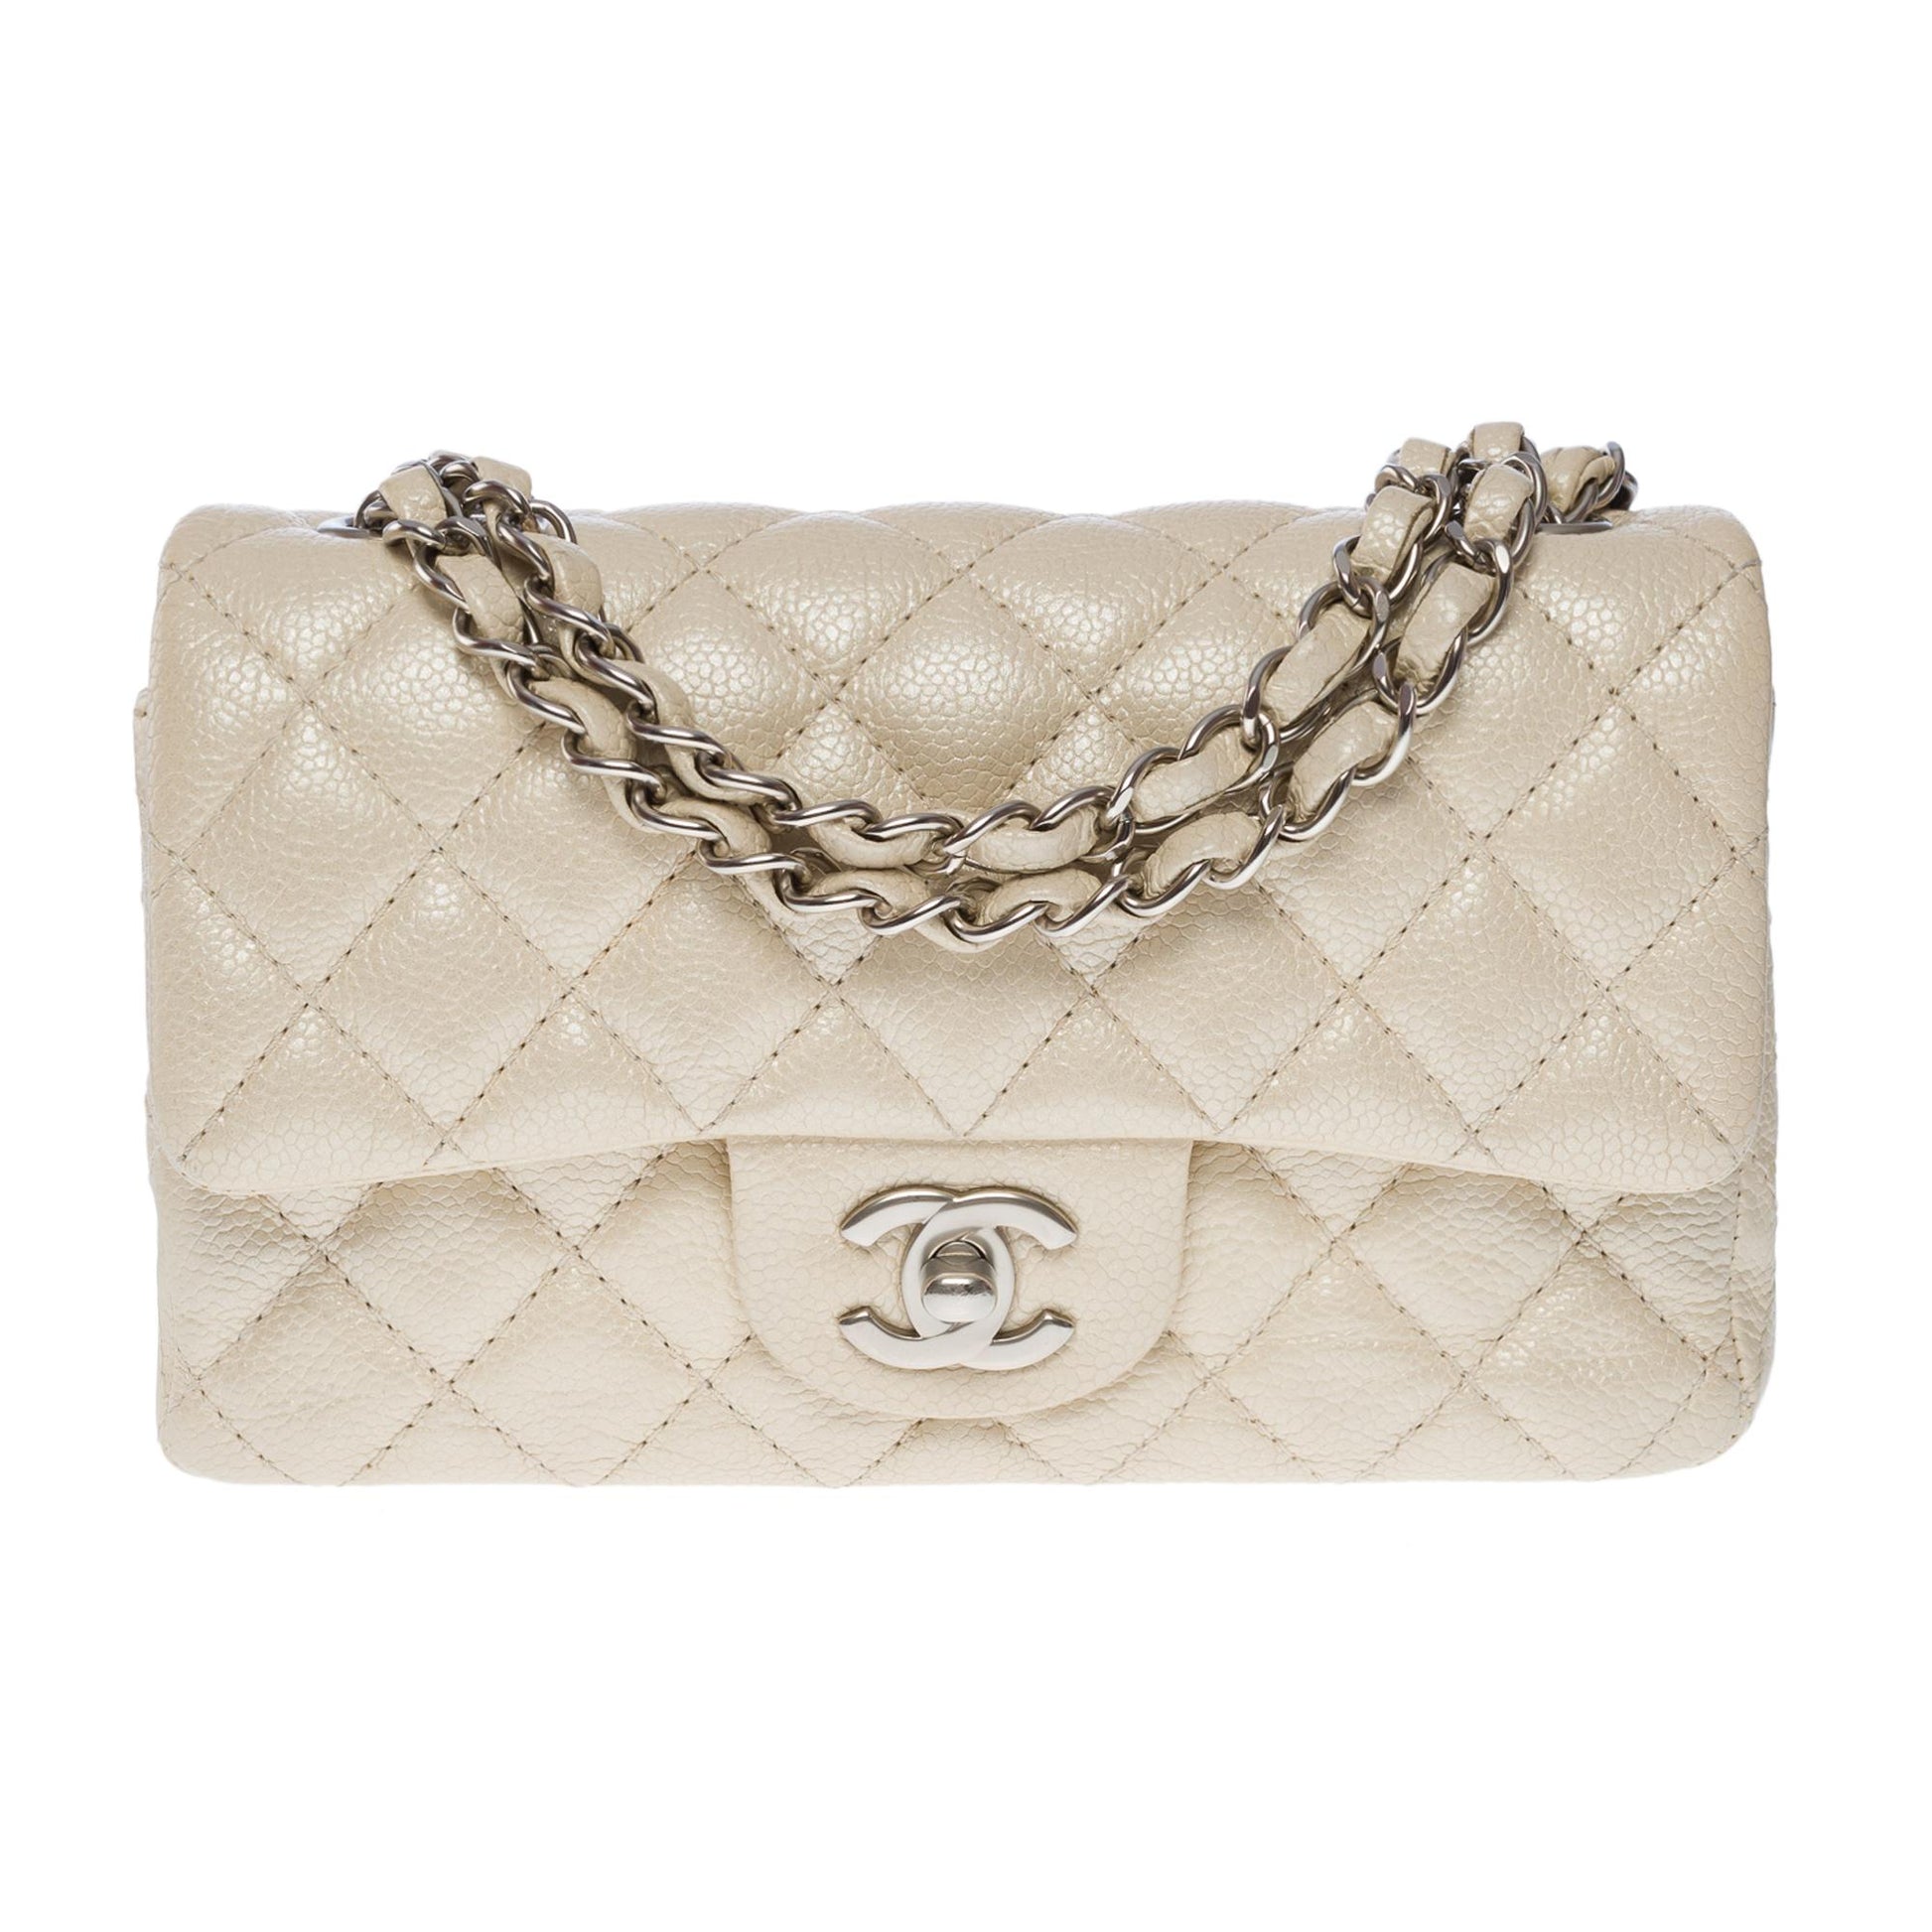 CHANEL Splendid Timeless Mini Flap bag in off white pearl quilted leat